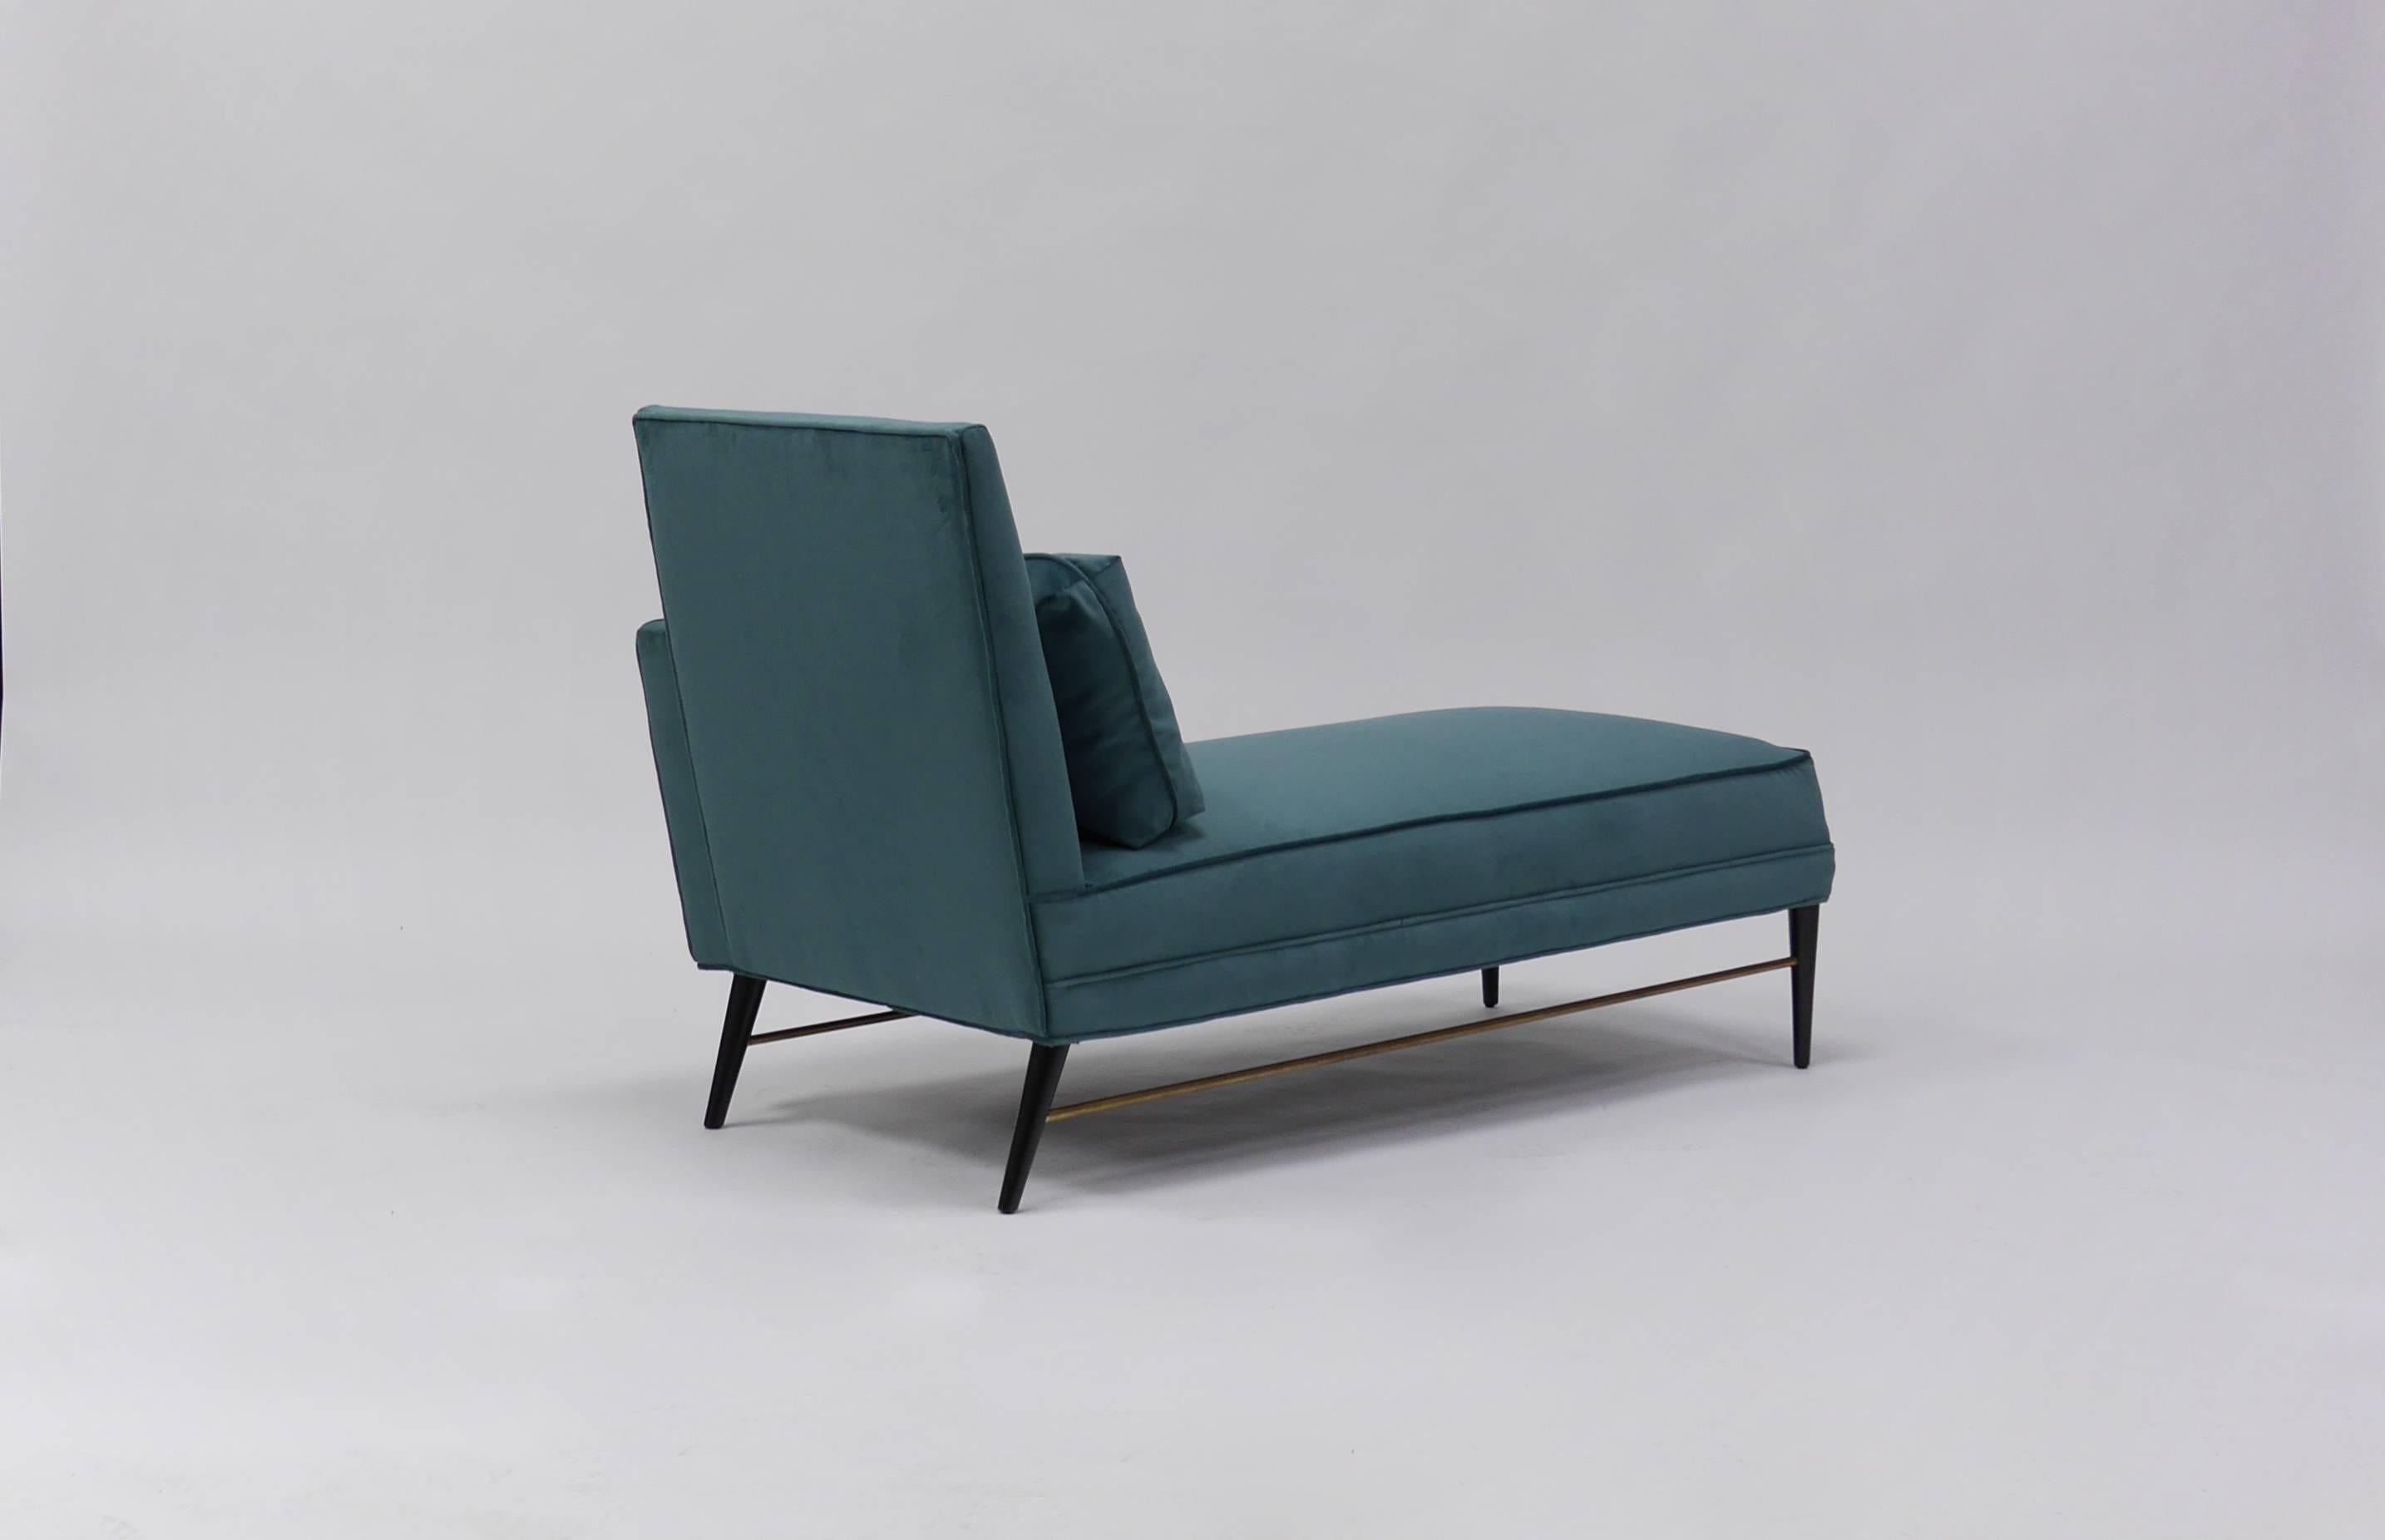 pair of chaise lounges